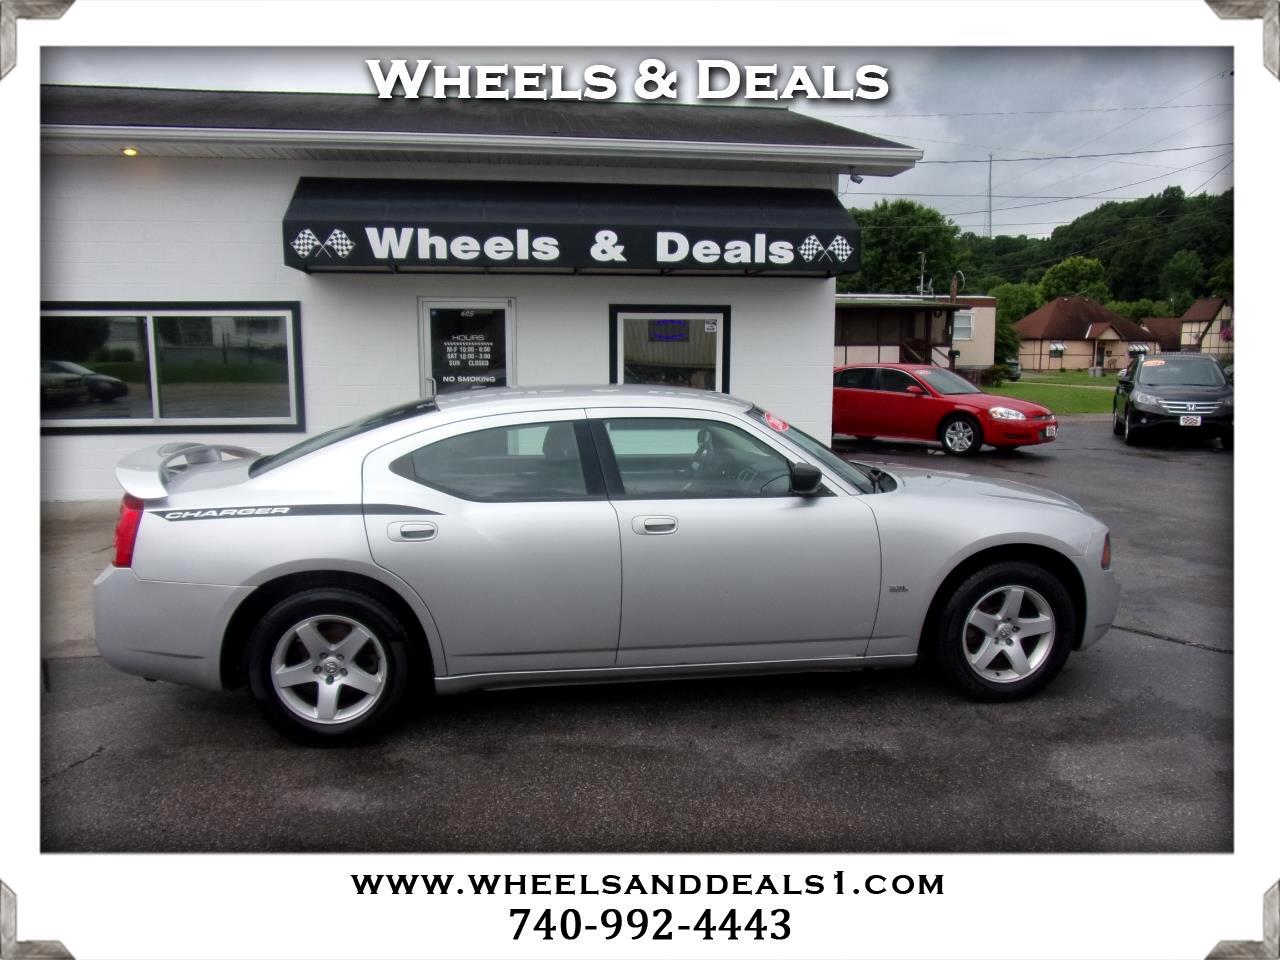 Used 2009 Dodge Charger Sxt For Sale In Middleport Oh 45760